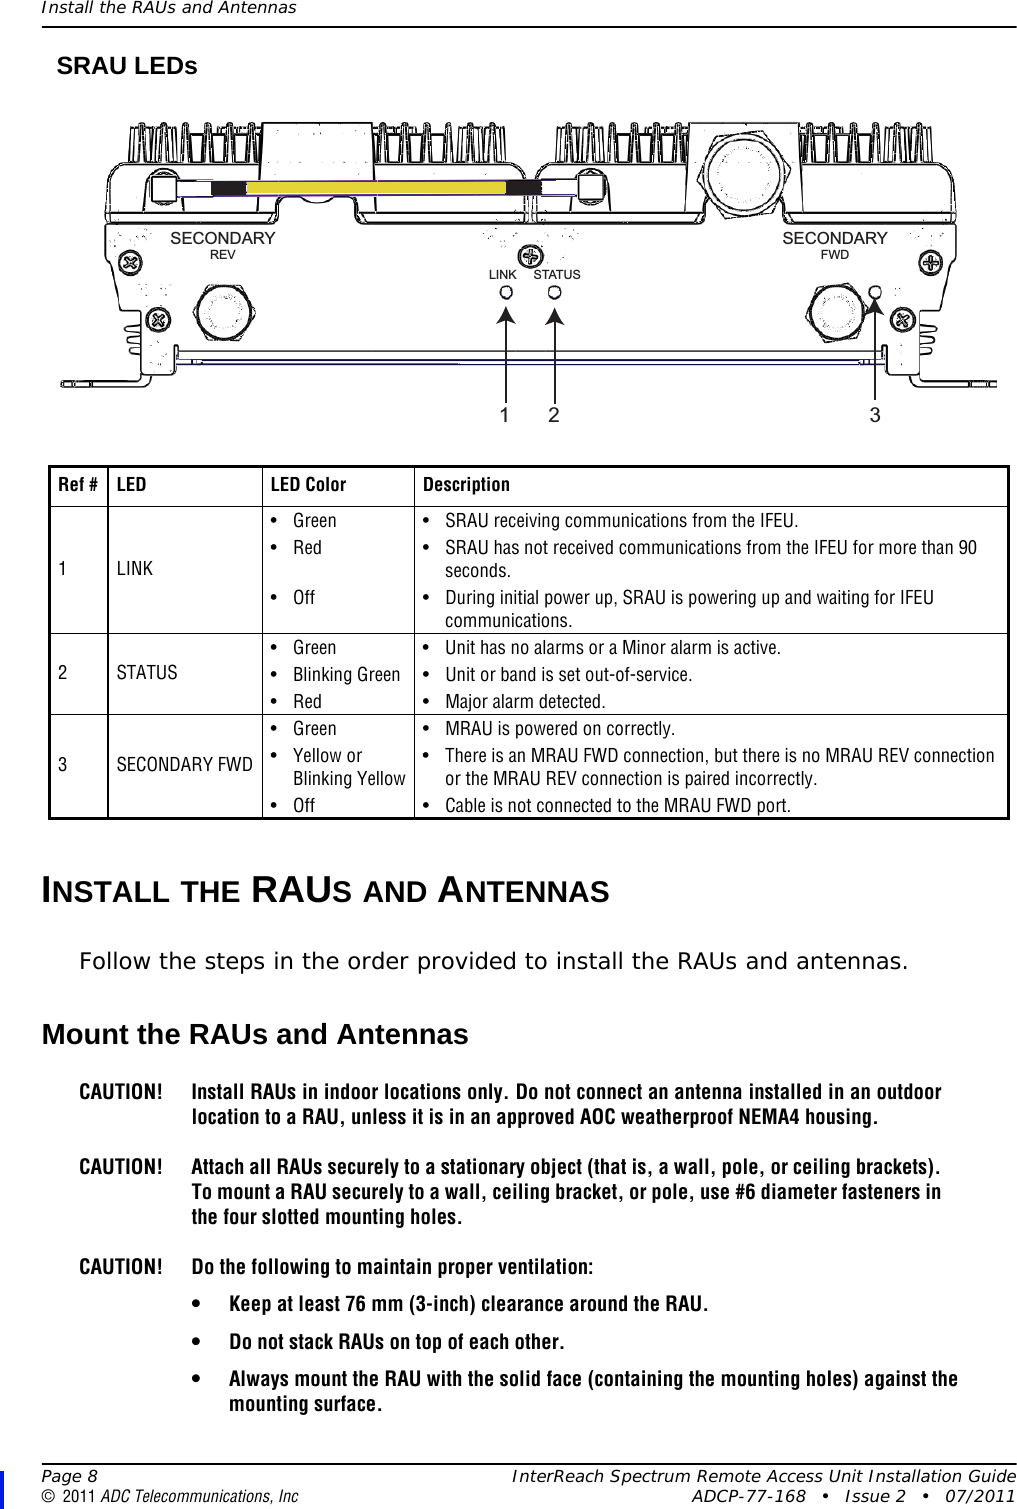 Install the RAUs and Antennas  Page 8 InterReach Spectrum Remote Access Unit Installation Guide© 2011 ADC Telecommunications, Inc ADCP-77-168 • Issue 2 • 07/2011SRAU LEDsINSTALL THE RAUS AND ANTENNASFollow the steps in the order provided to install the RAUs and antennas.Mount the RAUs and AntennasCAUTION! Install RAUs in indoor locations only. Do not connect an antenna installed in an outdoor location to a RAU, unless it is in an approved AOC weatherproof NEMA4 housing.CAUTION! Attach all RAUs securely to a stationary object (that is, a wall, pole, or ceiling brackets). To mount a RAU securely to a wall, ceiling bracket, or pole, use #6 diameter fasteners in the four slotted mounting holes.CAUTION! Do the following to maintain proper ventilation:• Keep at least 76 mm (3-inch) clearance around the RAU.• Do not stack RAUs on top of each other.• Always mount the RAU with the solid face (containing the mounting holes) against the mounting surface.Ref # LED LED Color Description1LINK•Green •SRAU receiving communications from the IFEU.• Red • SRAU has not received communications from the IFEU for more than 90 seconds.• Off • During initial power up, SRAU is powering up and waiting for IFEU communications.2STATUS• Green • Unit has no alarms or a Minor alarm is active.• Blinking Green • Unit or band is set out-of-service.• Red • Major alarm detected.3SECONDARY FWD• Green • MRAU is powered on correctly.•Yellow orBlinking Yellow• There is an MRAU FWD connection, but there is no MRAU REV connection or the MRAU REV connection is paired incorrectly.• Off • Cable is not connected to the MRAU FWD port.LINK STATUSSECONDARYREVSECONDARYFWD21 3